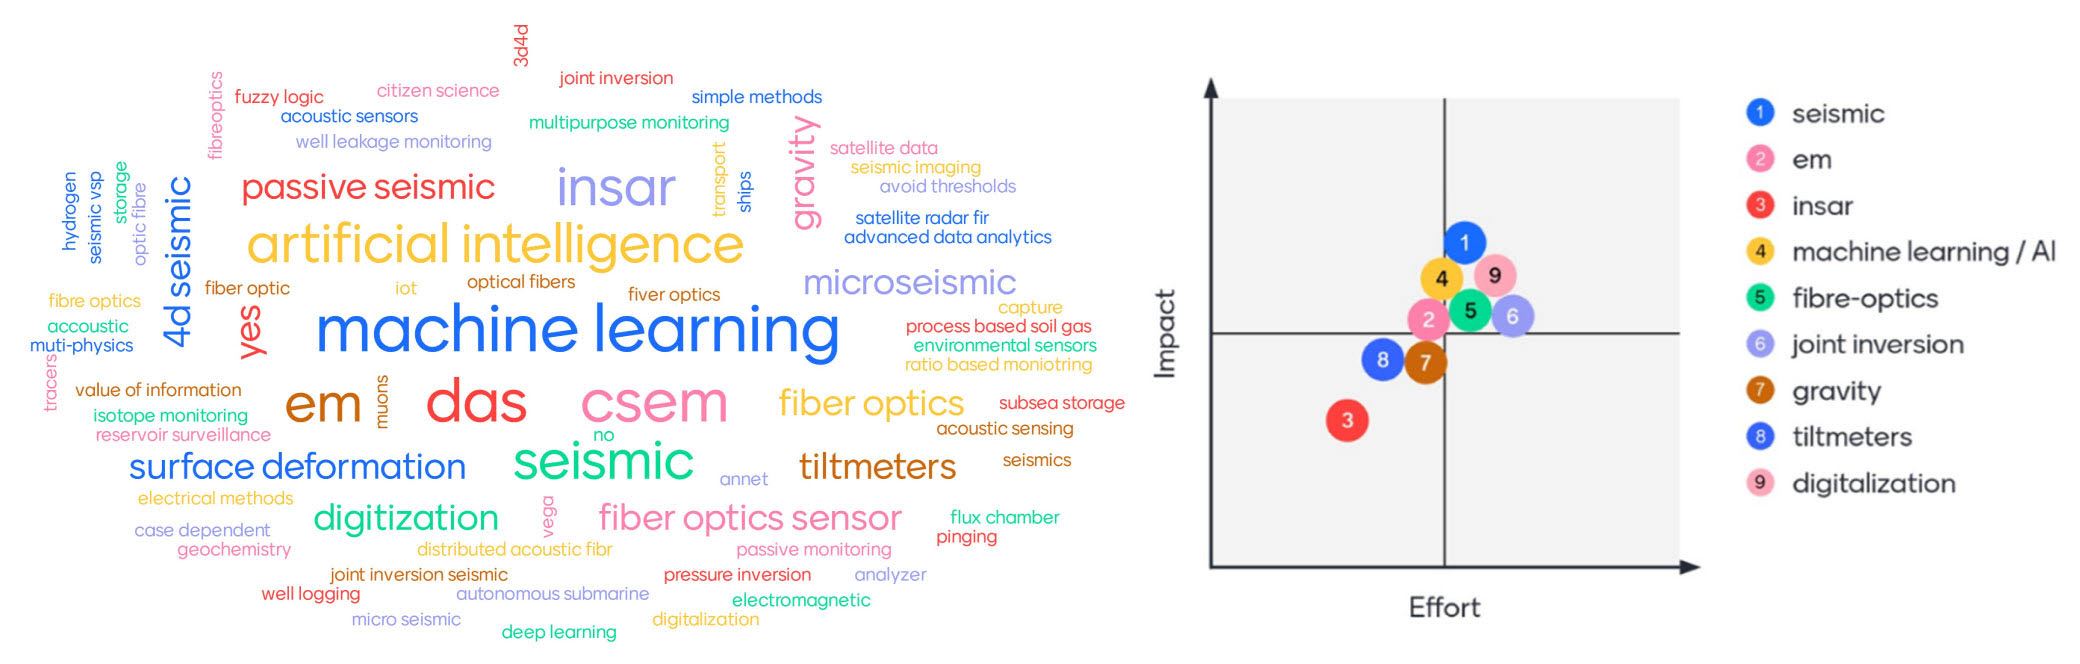 Word cloud summarizing webinar particpants answers to What are the most promising emerging technologies for CO2 monitoring. (right) Boston square matrix showing webinar participants answers to Estimate potential impact of technology when deployed and the research effort needed to get there.